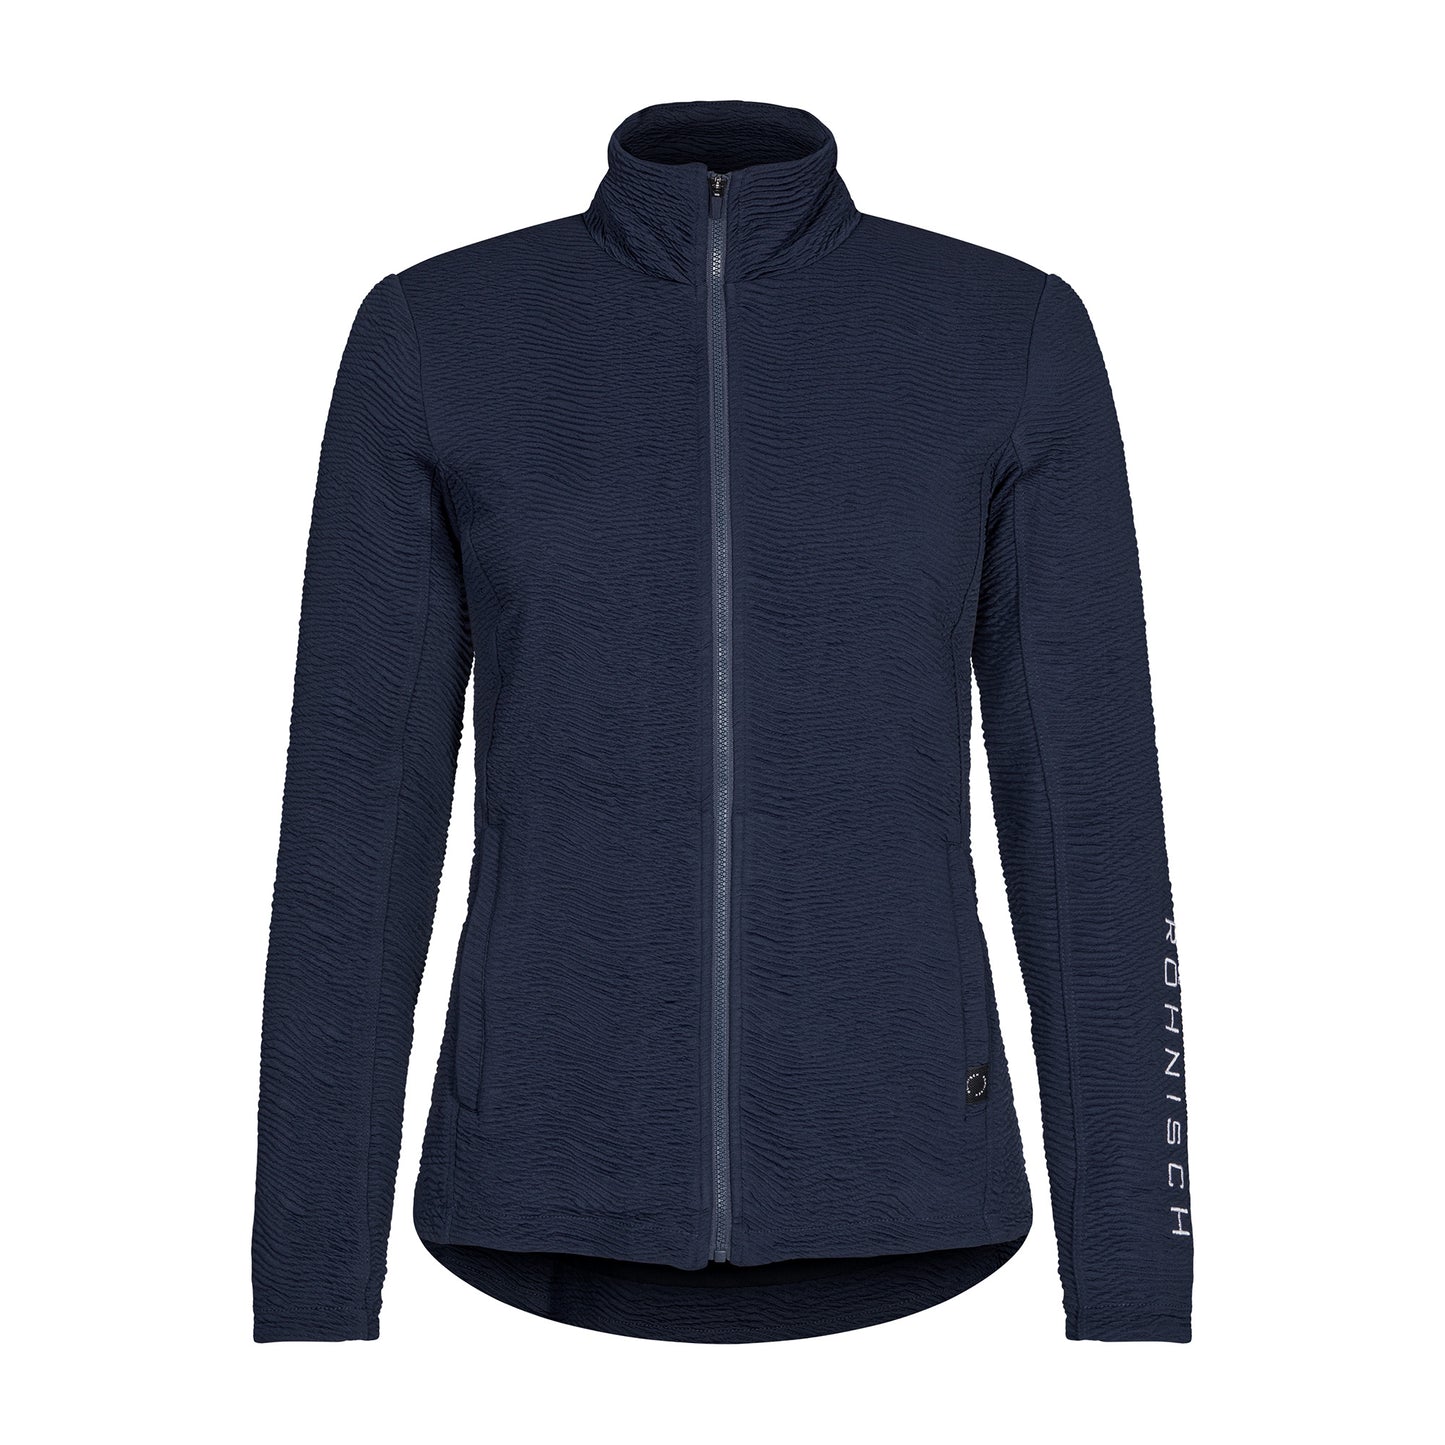 Rohnisch Ladies Fully Lined Ripple Textured Jacket in Navy - Last One XL Only Left